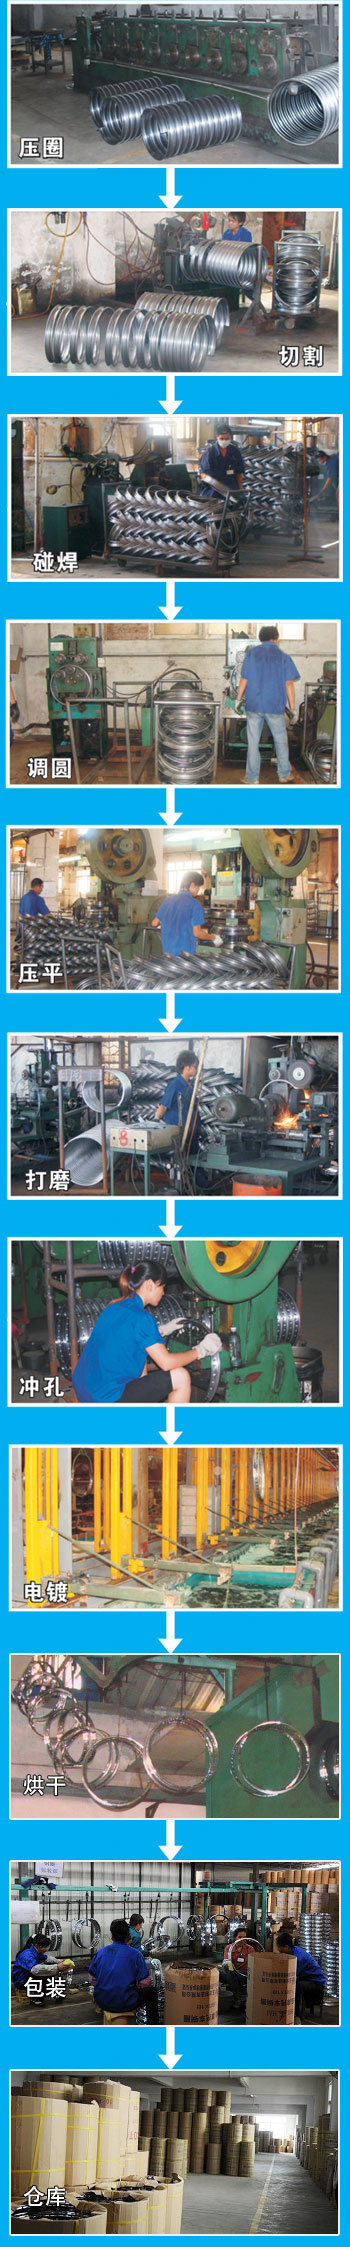 Motorcycle wheel production process